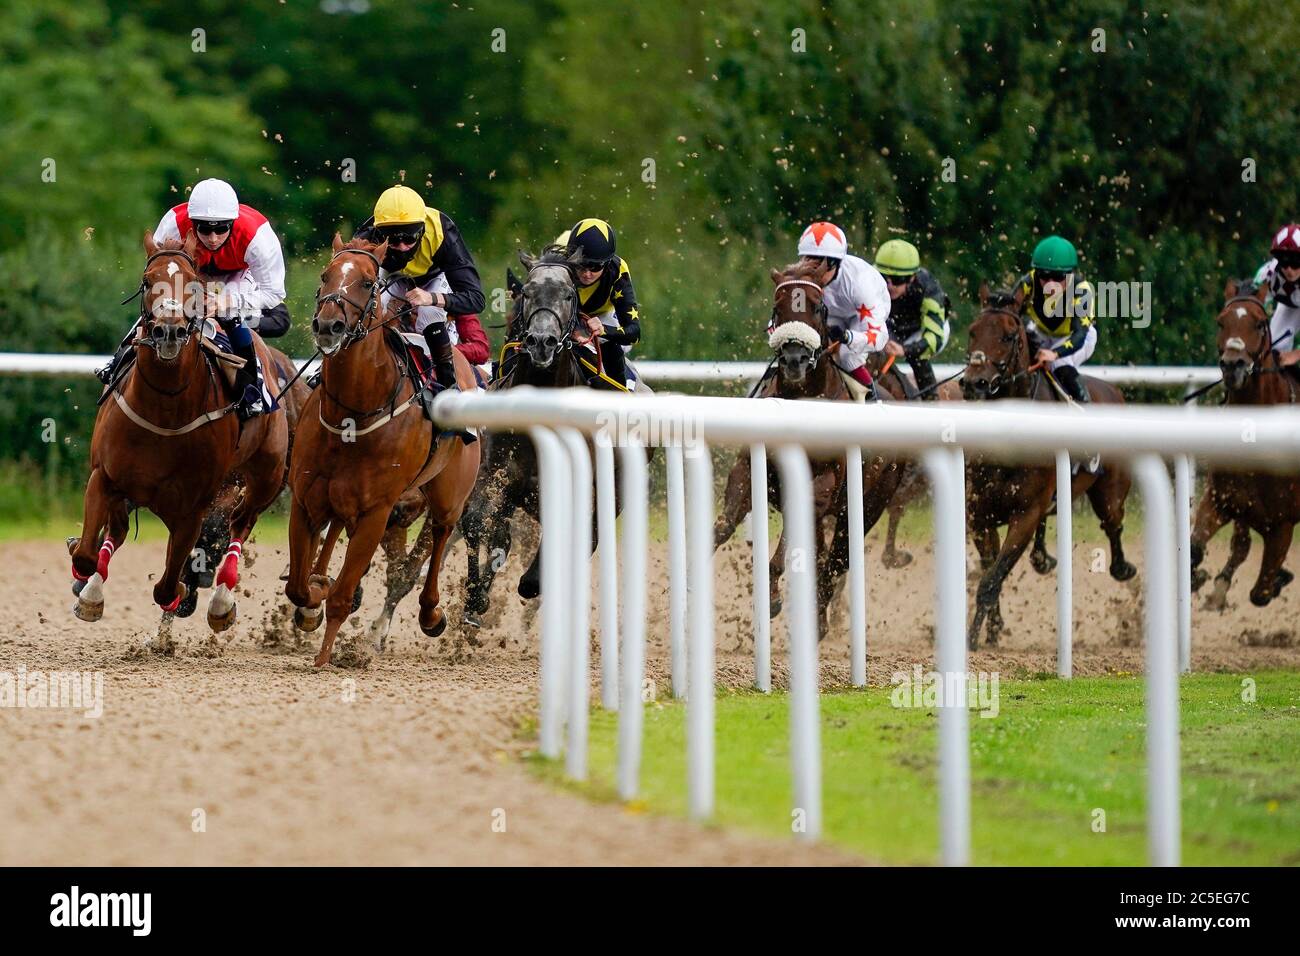 Savalas ridden by Hollie Doyle riding Savalas (third left) go on to win The Sky Sports Racing On Sky 415 Handicap at Wolverhampton Racecourse. Stock Photo